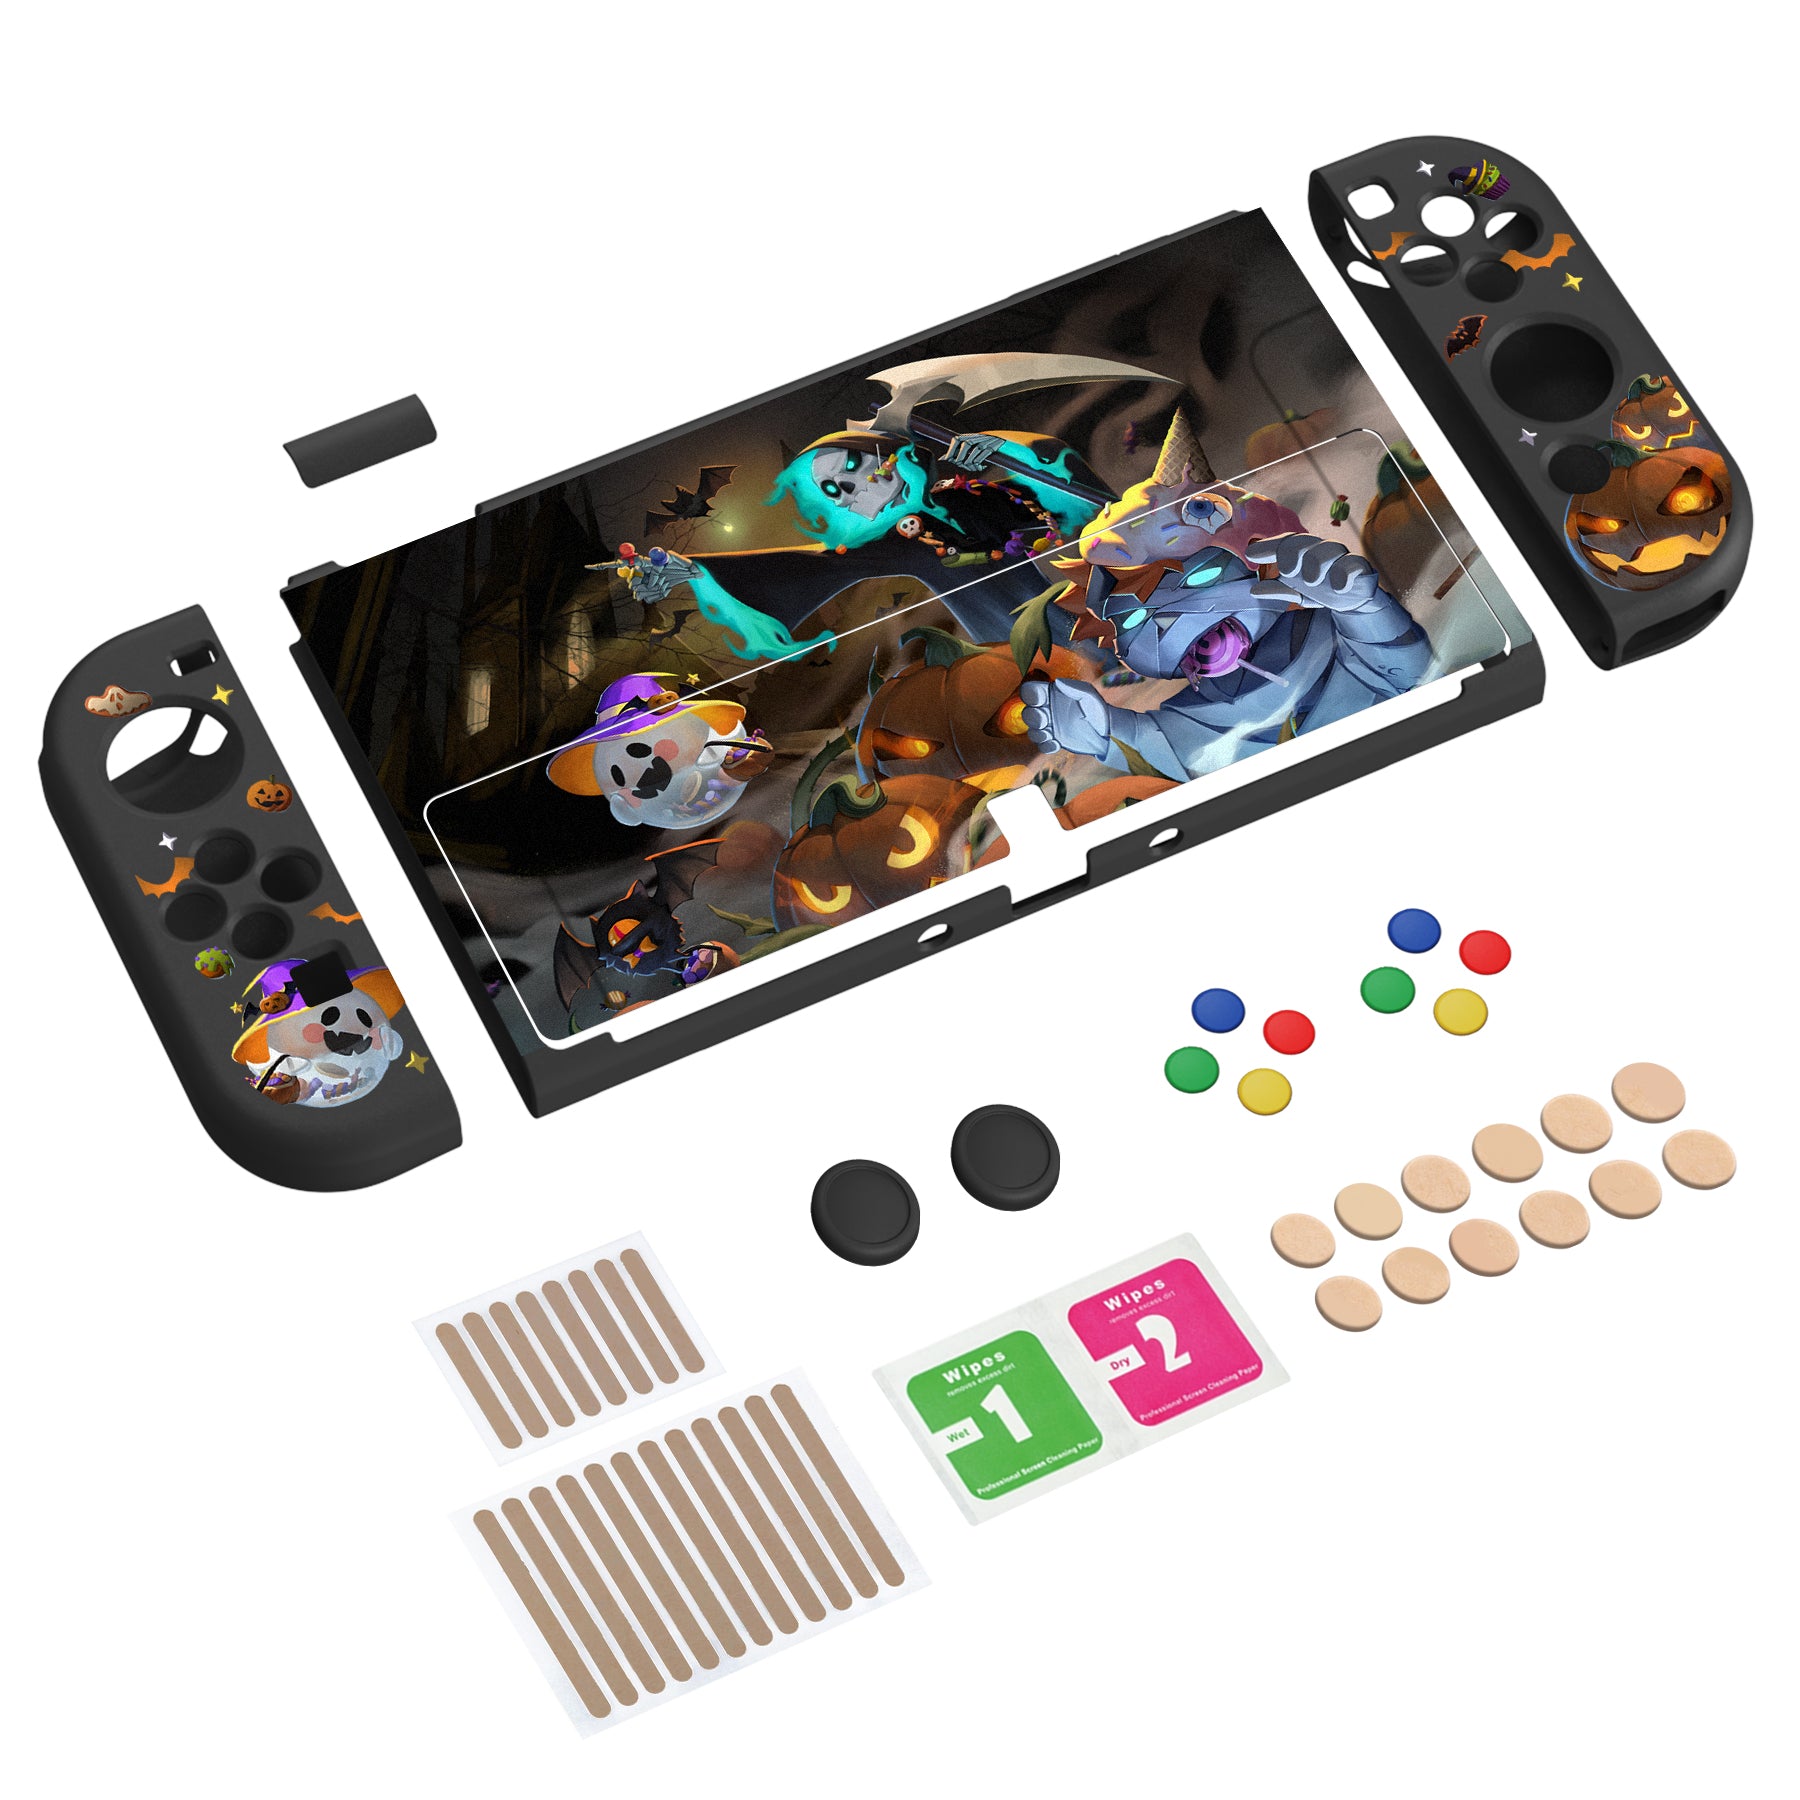 PlayVital ZealProtect Soft Protective Case for Switch OLED, Flexible Protector Joycon Grip Cover for Switch OLED with Thumb Grip Caps & ABXY Direction Button Caps - Halloween Candy Night - XSOYV6020 playvital